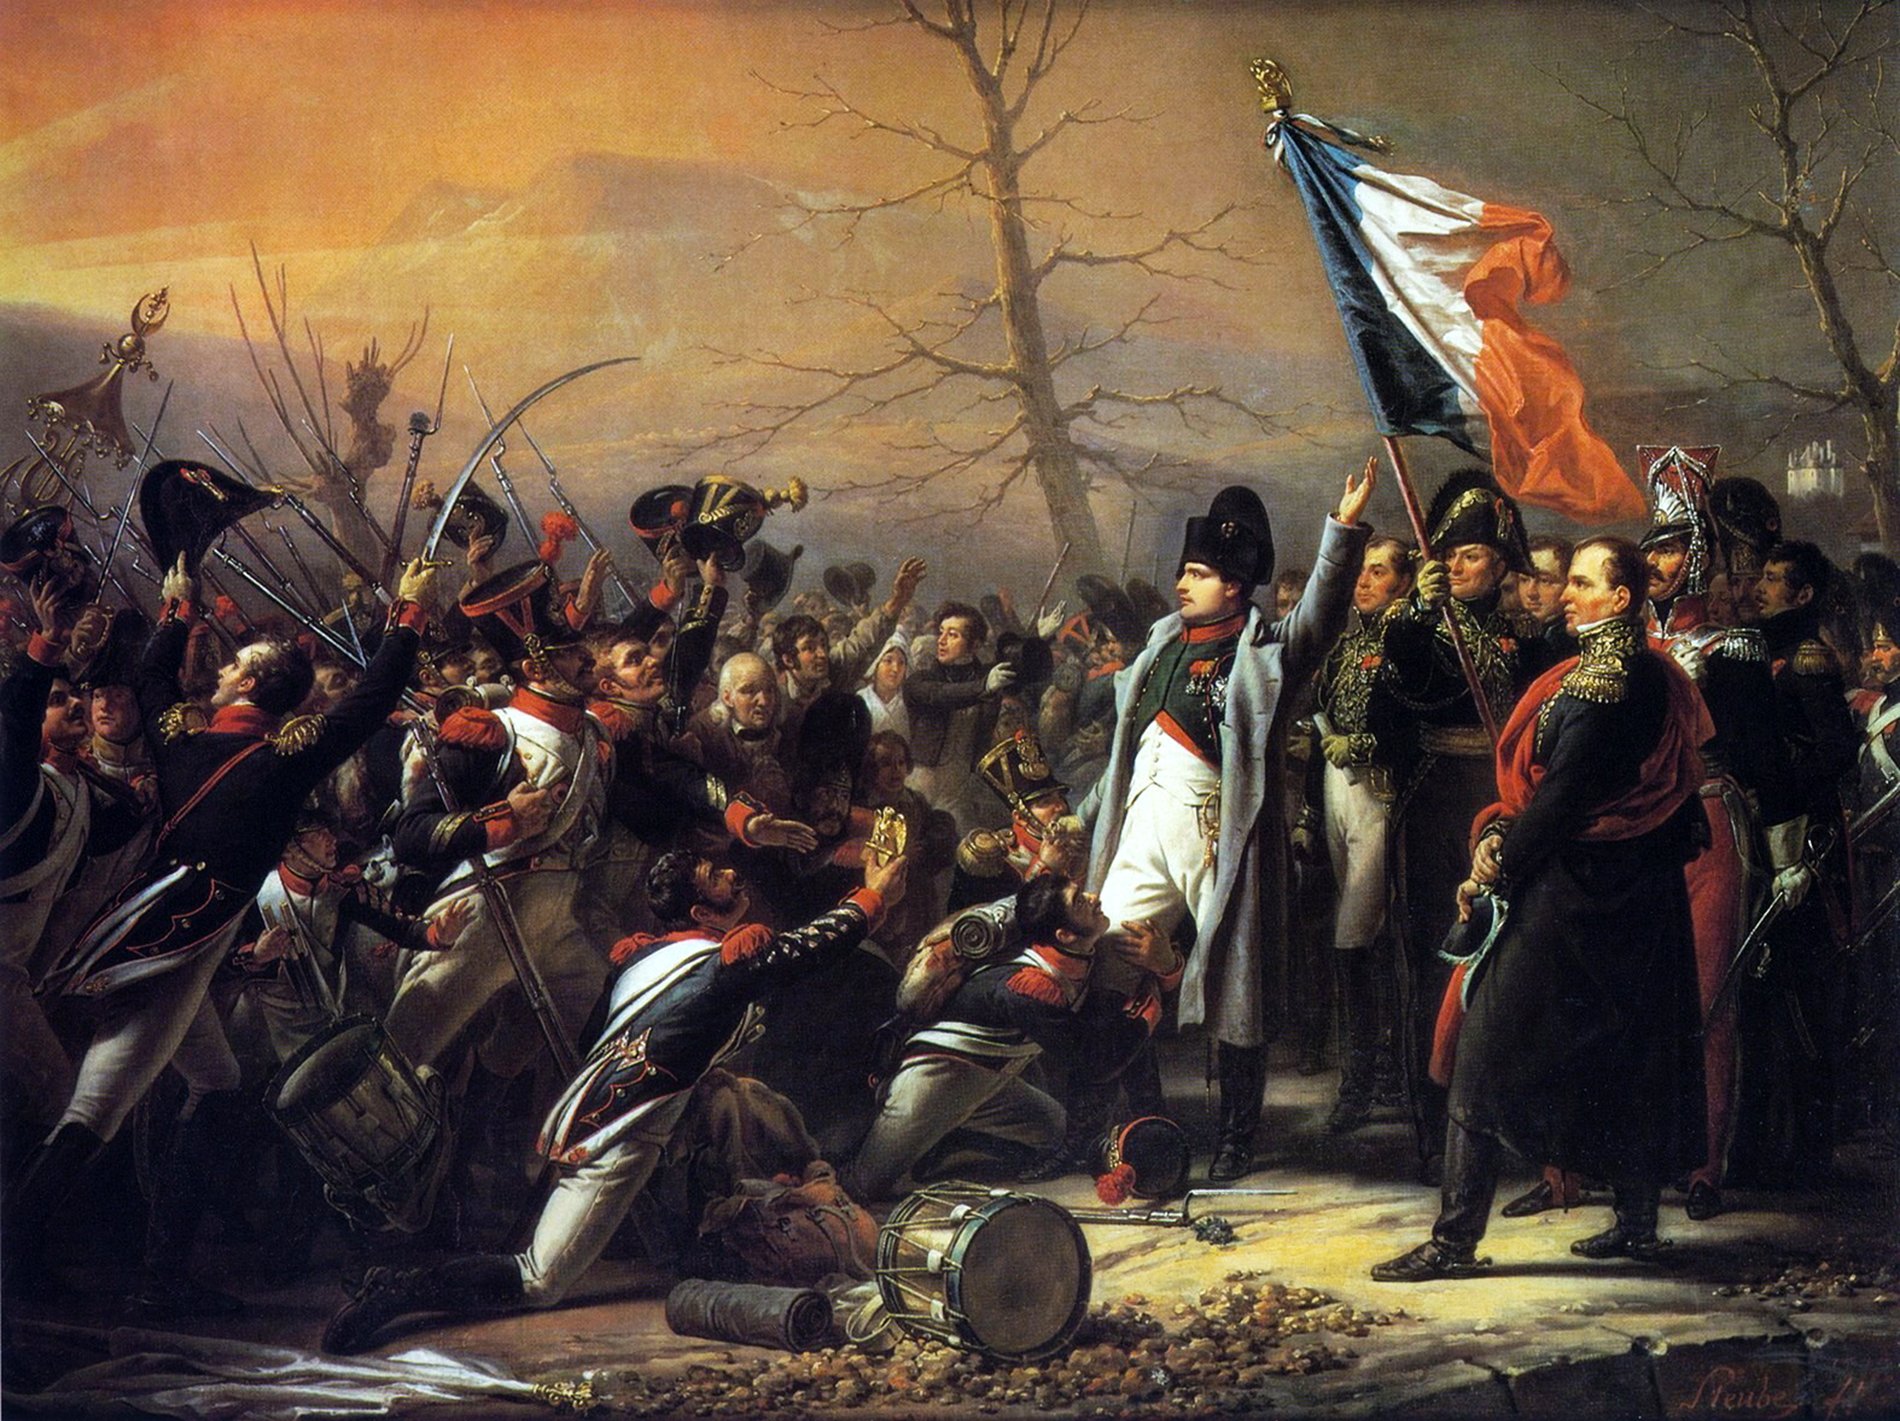 Dramatic painting depicting Napoleon's Return from Elba, showing Napoleon Bonaparte in a white uniform, confidently standing in the center, while around him, soldiers and civilians alike demonstrate a mix of emotions ranging from loyalty and reverence to shock and disbelief. A French tricolor flag waves prominently, symbolizing Napoleon's resurgence. Fallen drums, weapons, and hats on the ground suggest a recent skirmish or the suddenness of the event, while the muted tones of the sky and background add a sense of tension to the scene.